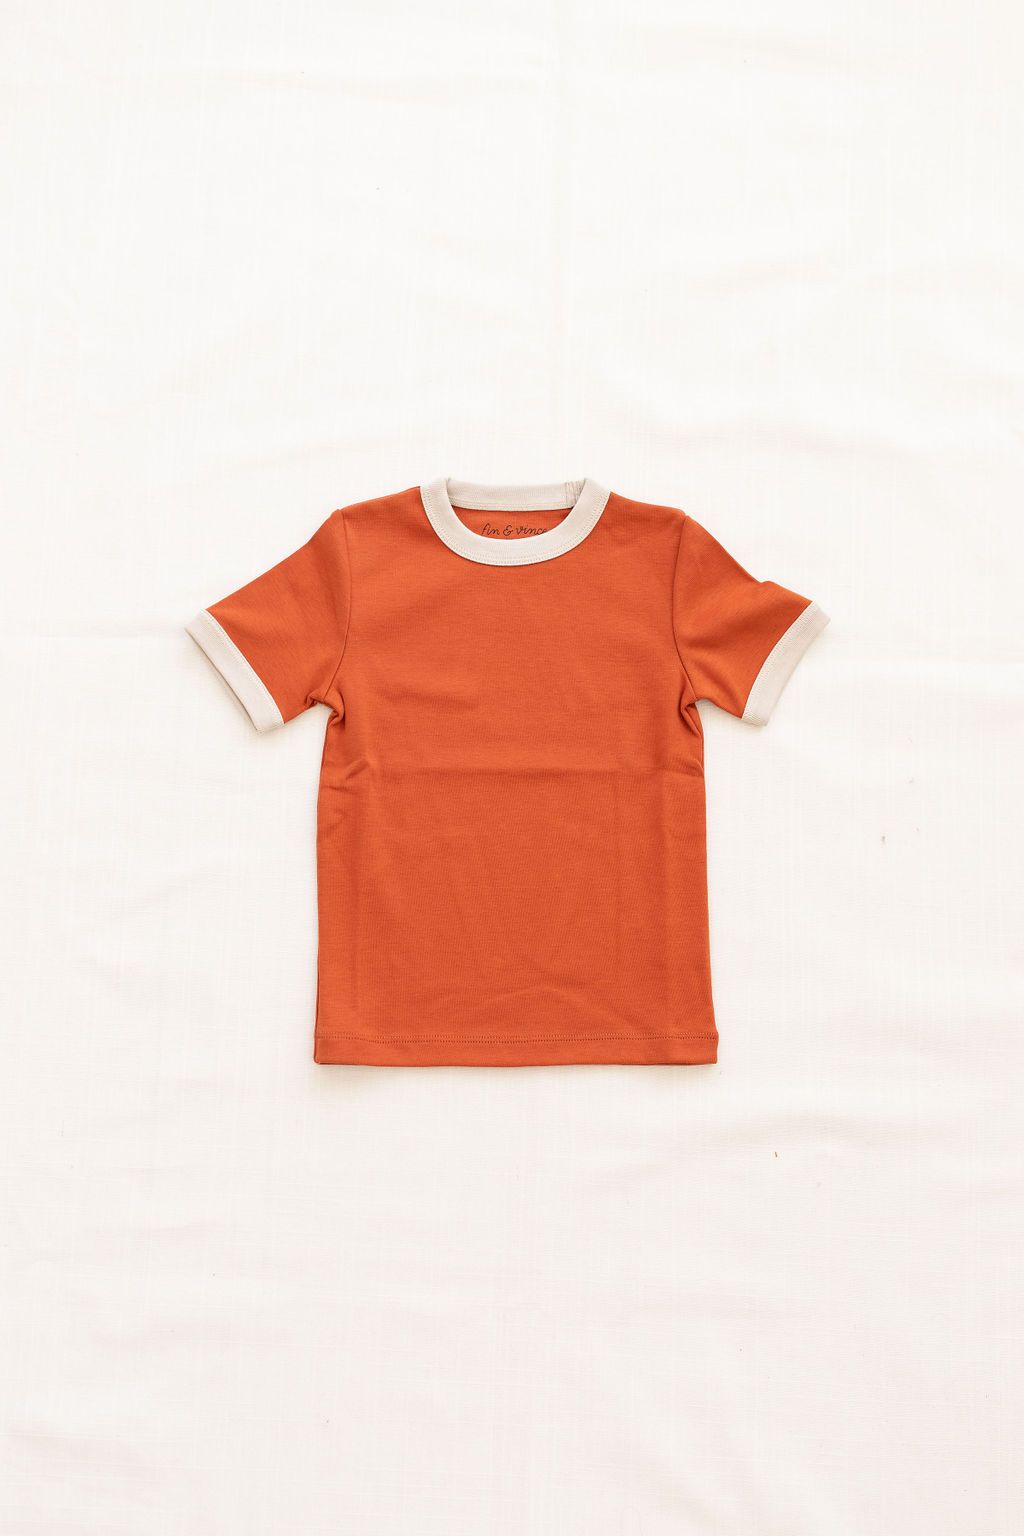 Fin & Vince Vintage Tee, Red Rock/Oatmeal Trim